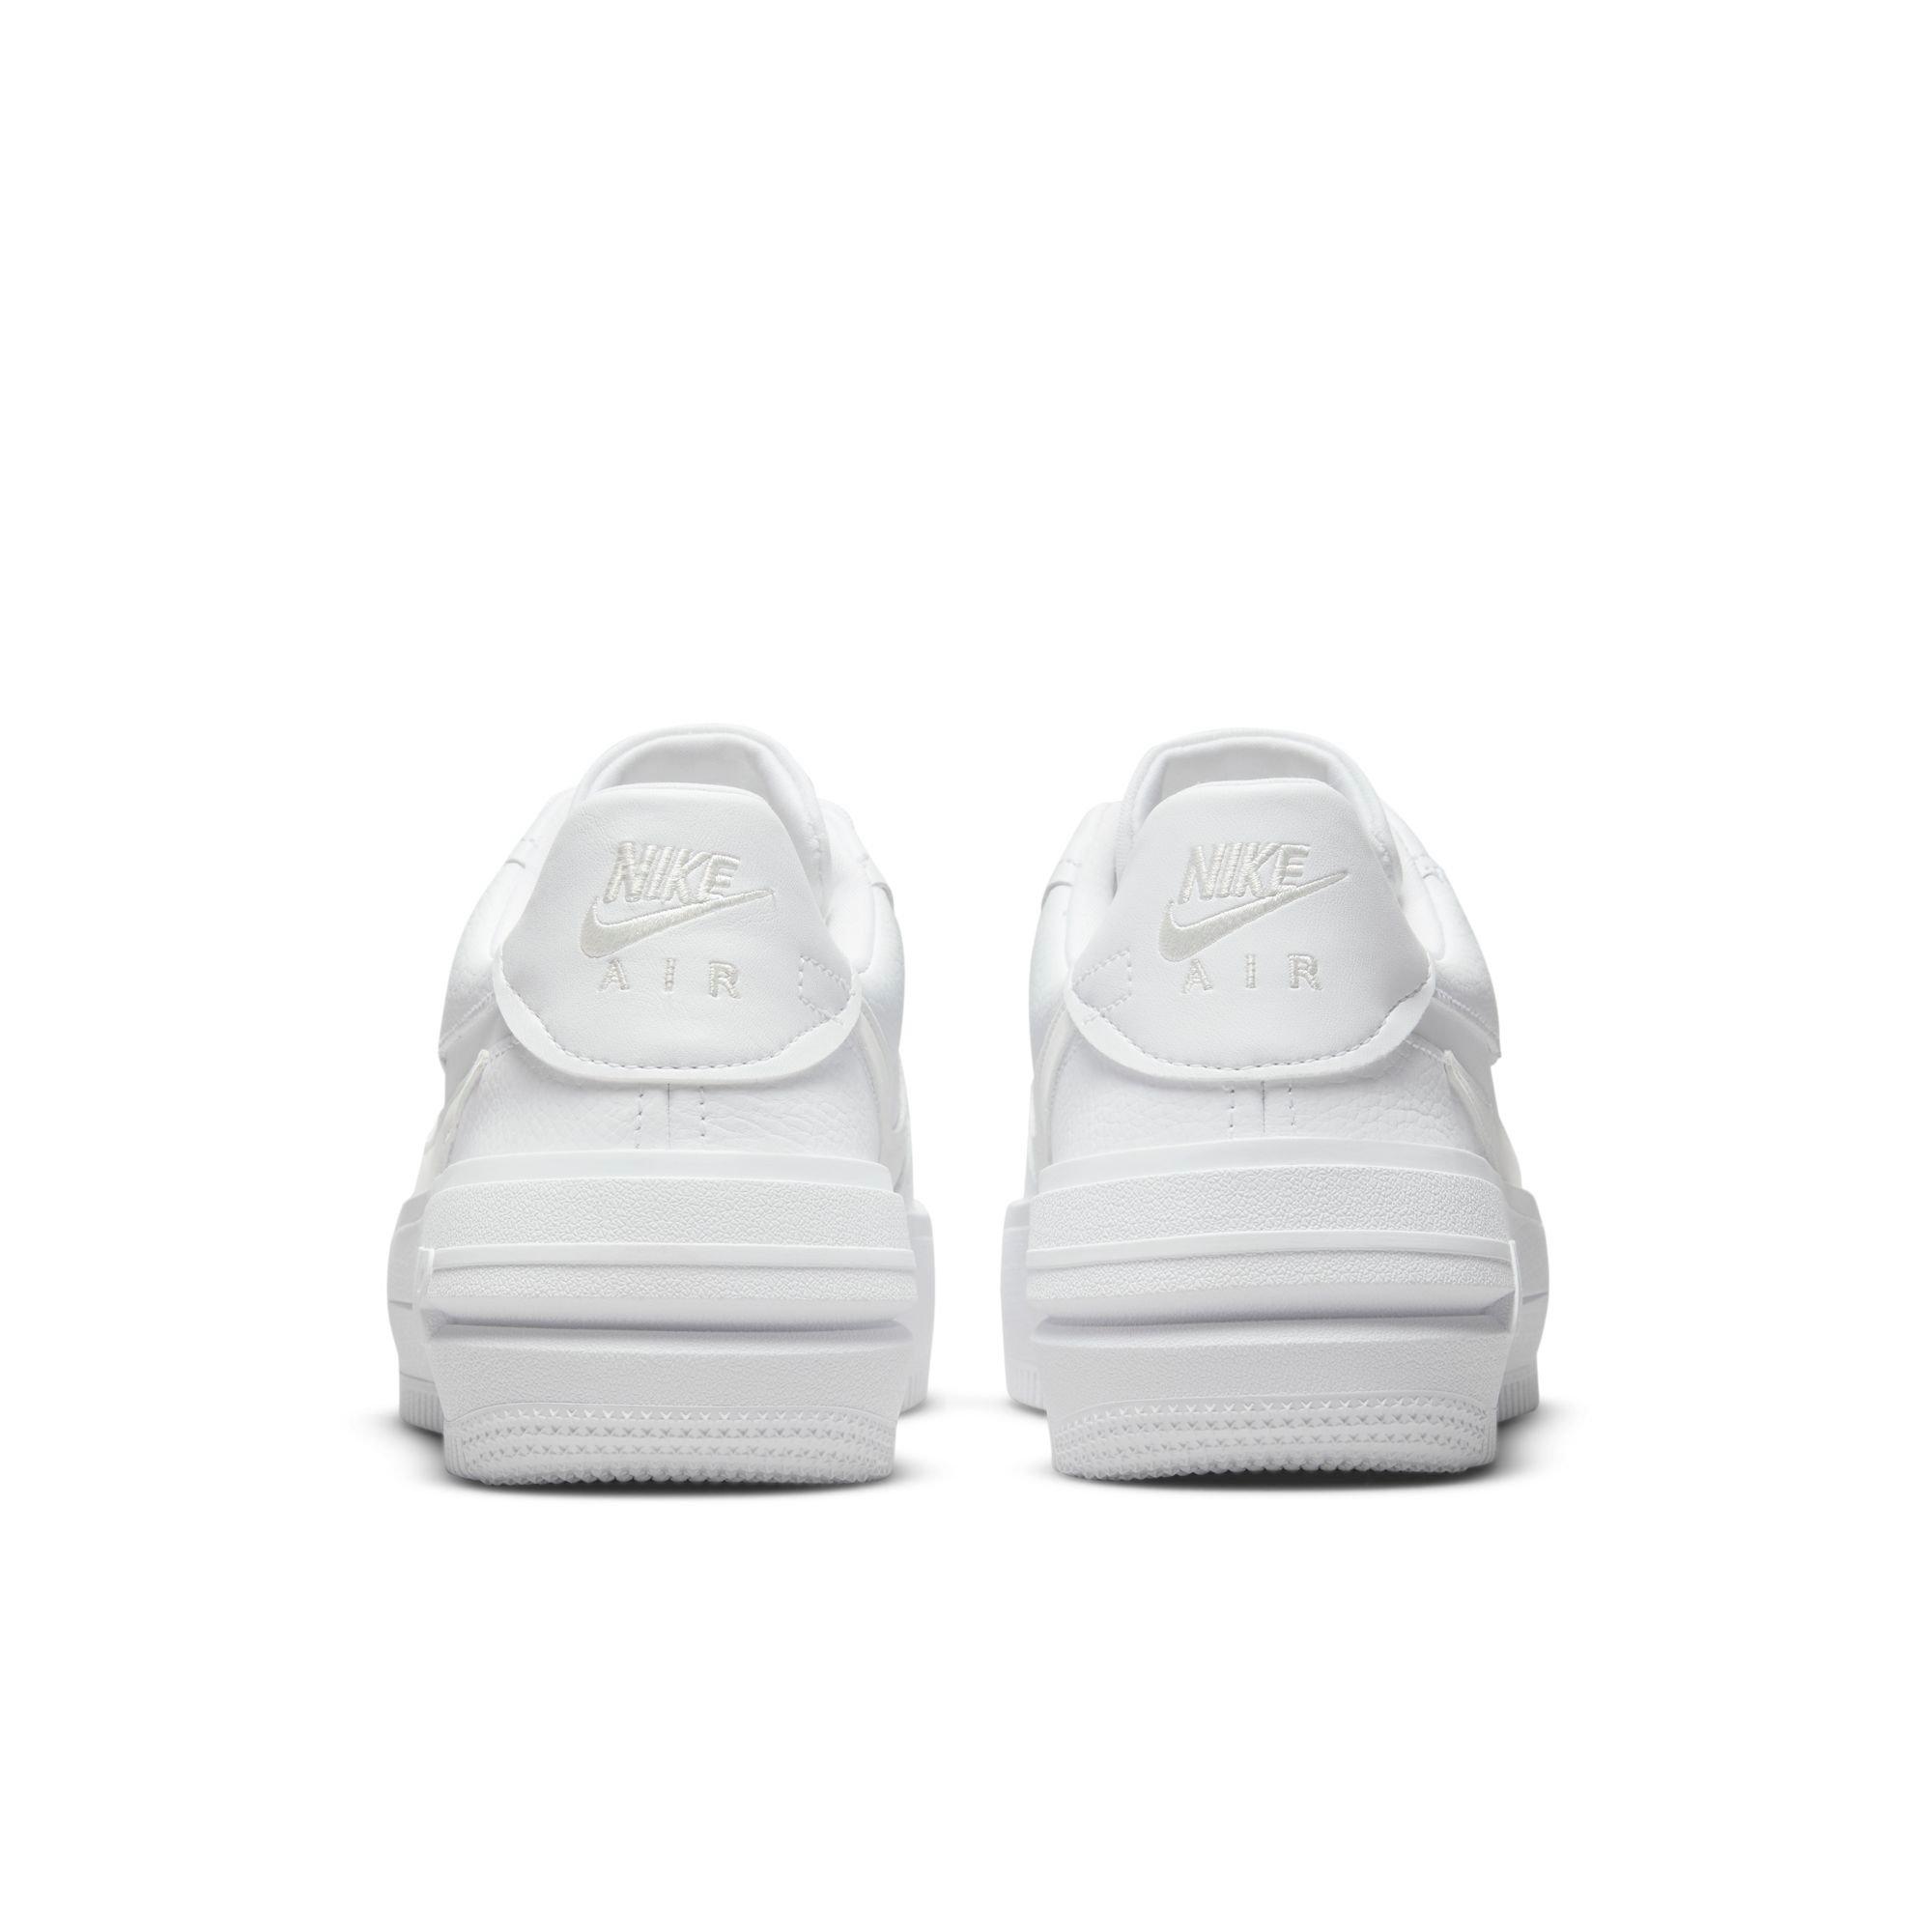 Nike Air Force 1 PLT.AF.ORM Sneaker in Pale Ivory/White/Brown at Nordstrom, Size 5